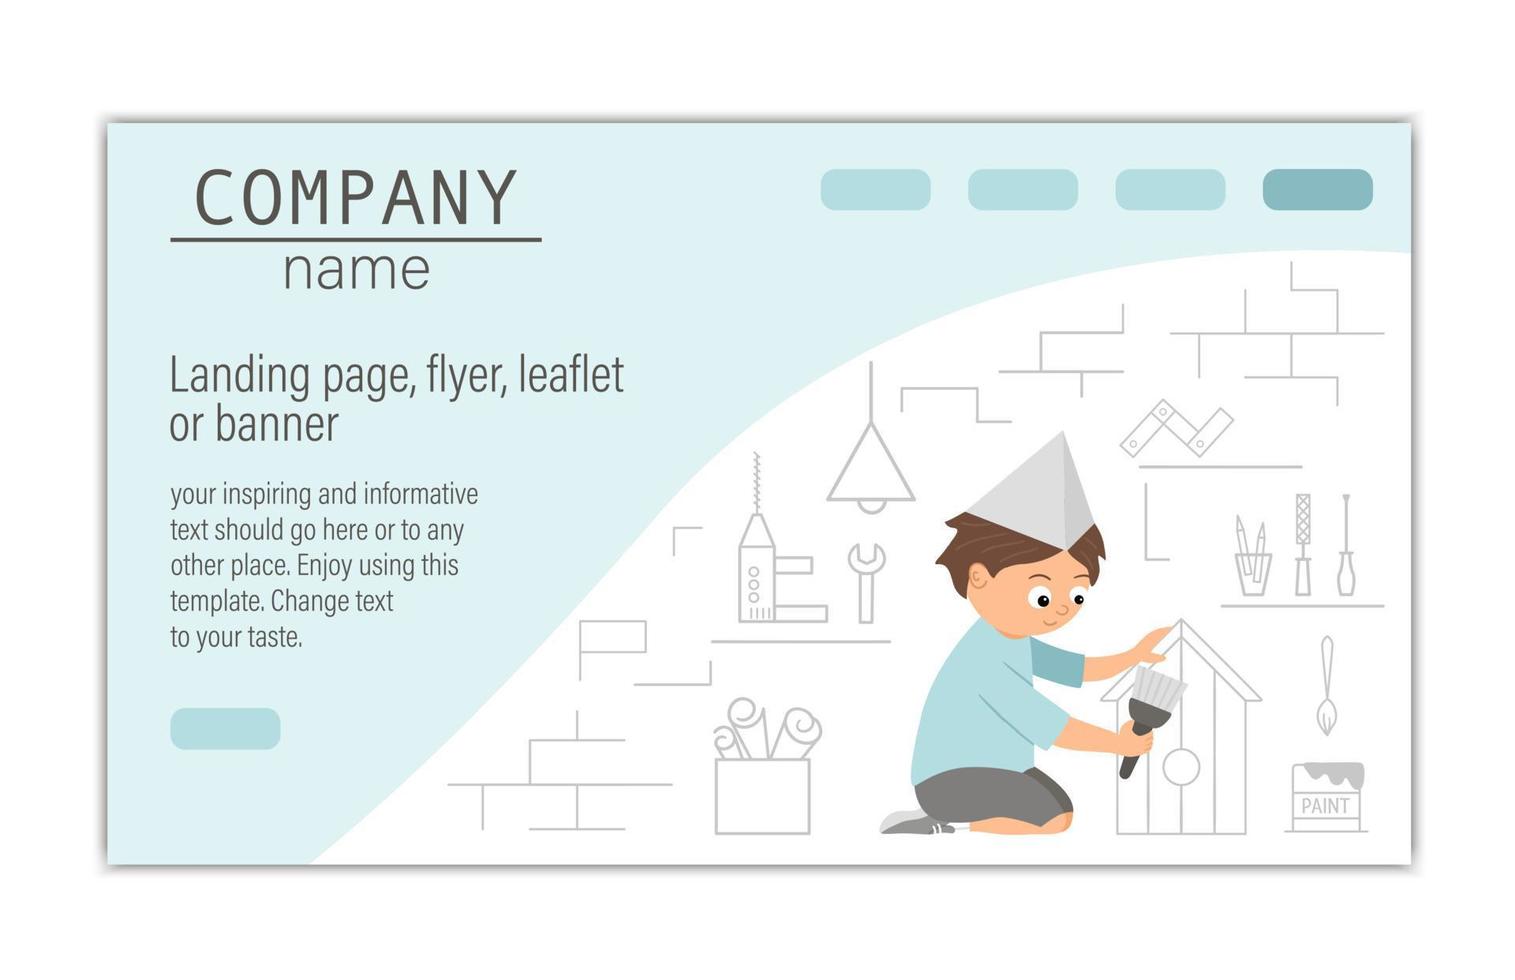 Flyer, card, banner or landing page template for building, repairing service company or craft masterclass website.  Vector flat illustration of a man painting a nestling box on workshop background